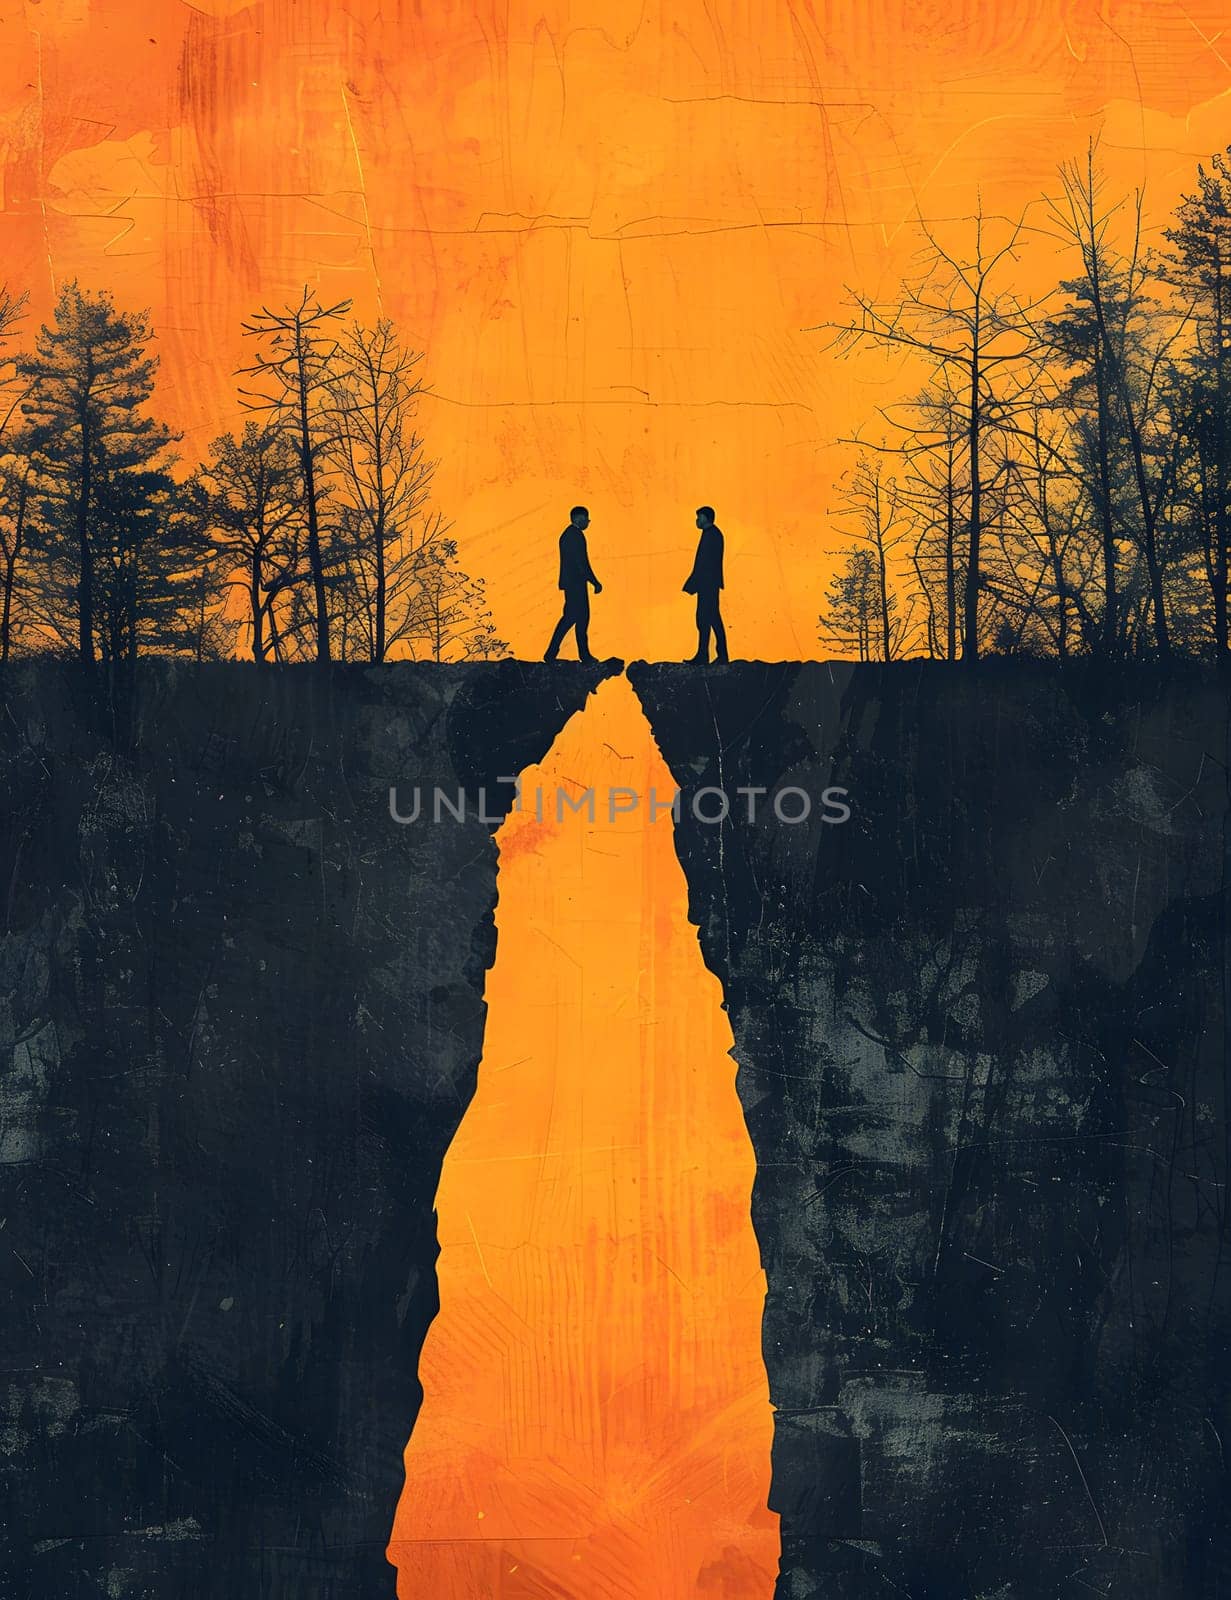 Two figures traverse a cliff overlooking a stunning natural landscape at sunset. The sky is painted with warm tints and shades, casting a golden hue over the horizon